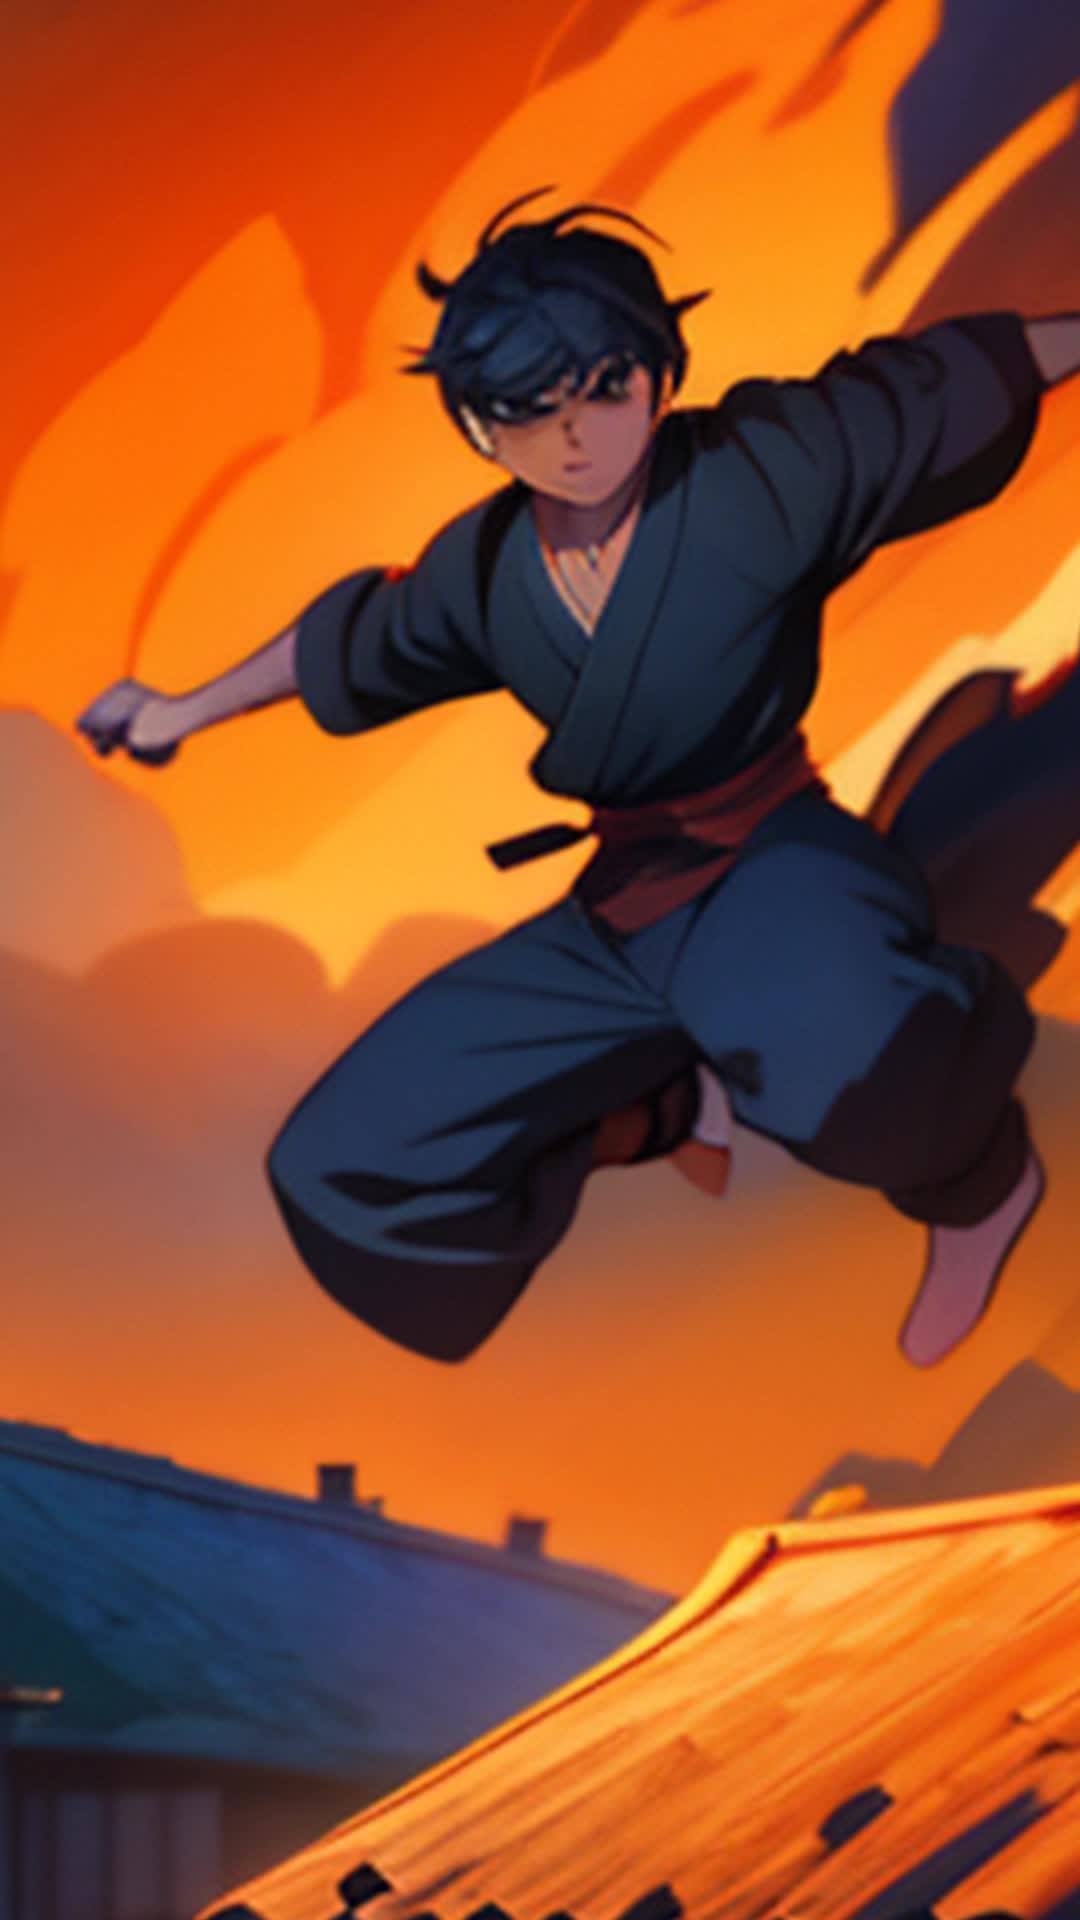 Outcast ninja in fiery whirlwind, leaping between rooftops, demon power pulsing, vibrant village backdrop, dusk setting, dramatic clouds swirling, action-packed, wide-angle shot, highly detailed and sharp focus, soft shadows